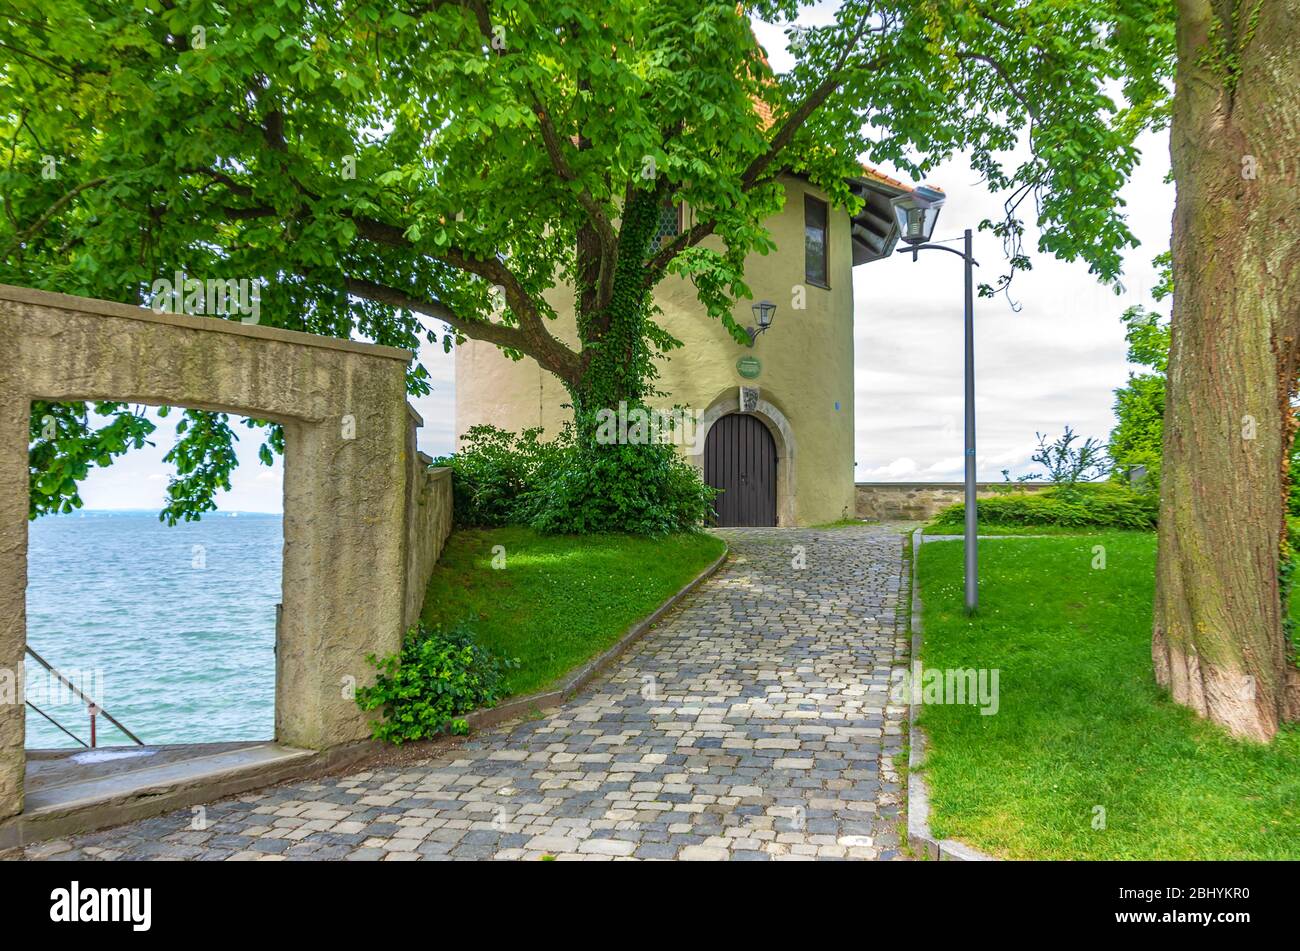 The historic gunpowder tower of the old town fortification on the Northwest bank of the Old Town of Lindau in Lake Constance, Bavaria, Germany. Stock Photo